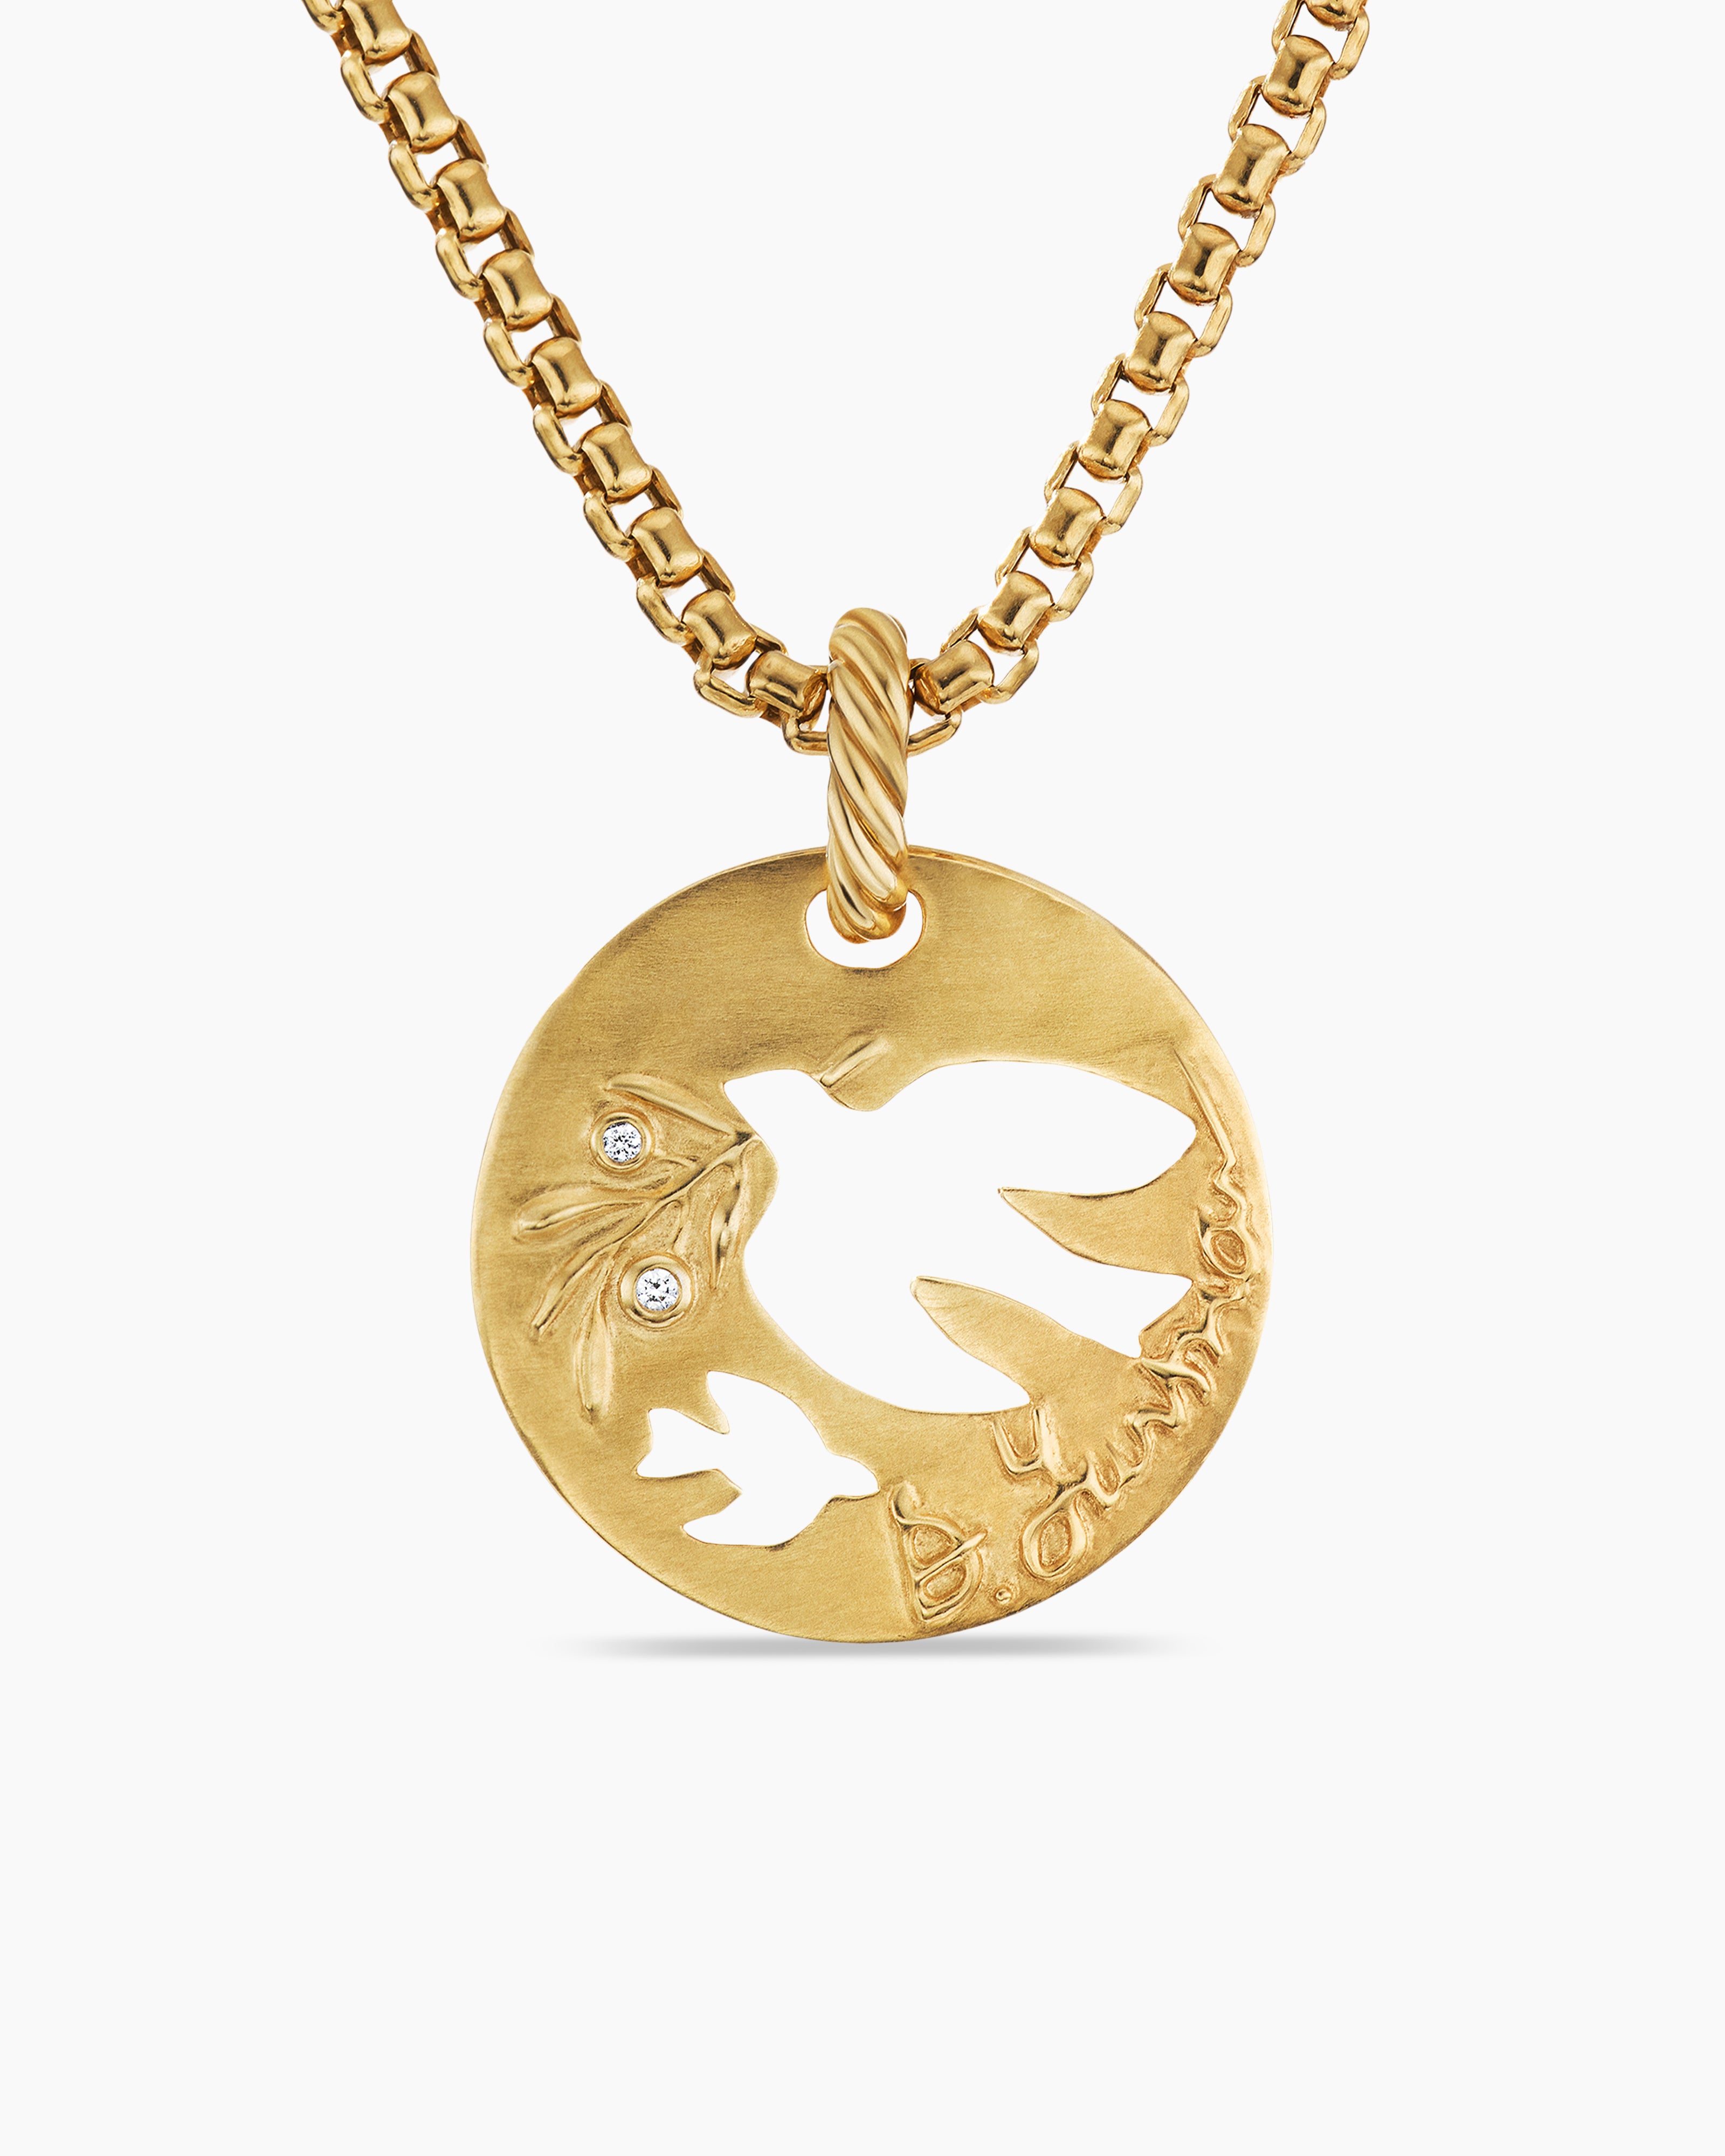 Buy Gold-Toned Necklaces & Pendants for Women by The Pari Online